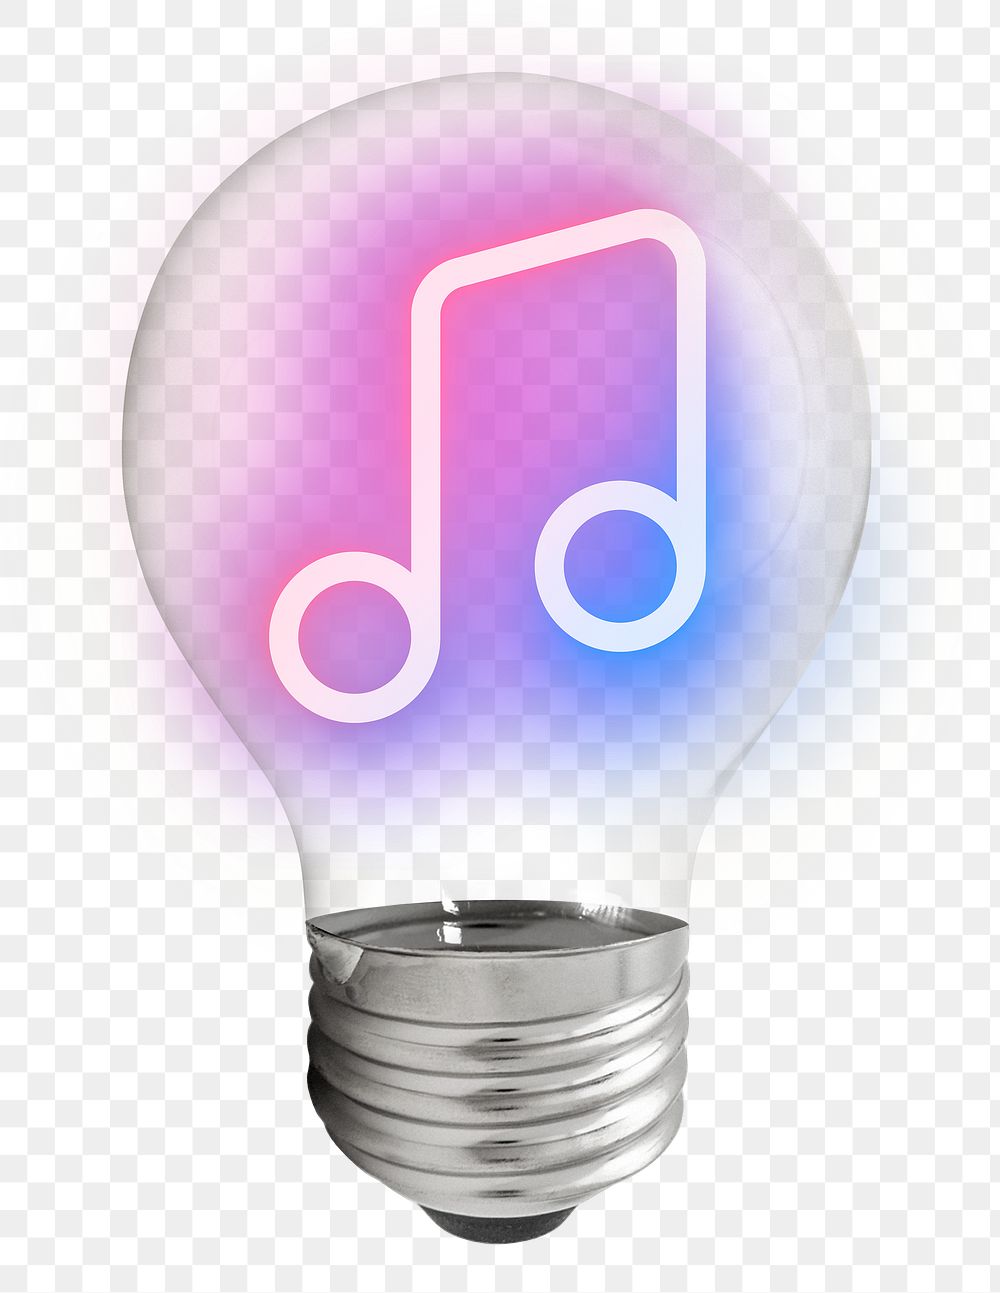 Music note icon png light bulb sticker, neon symbol graphic on transparent background